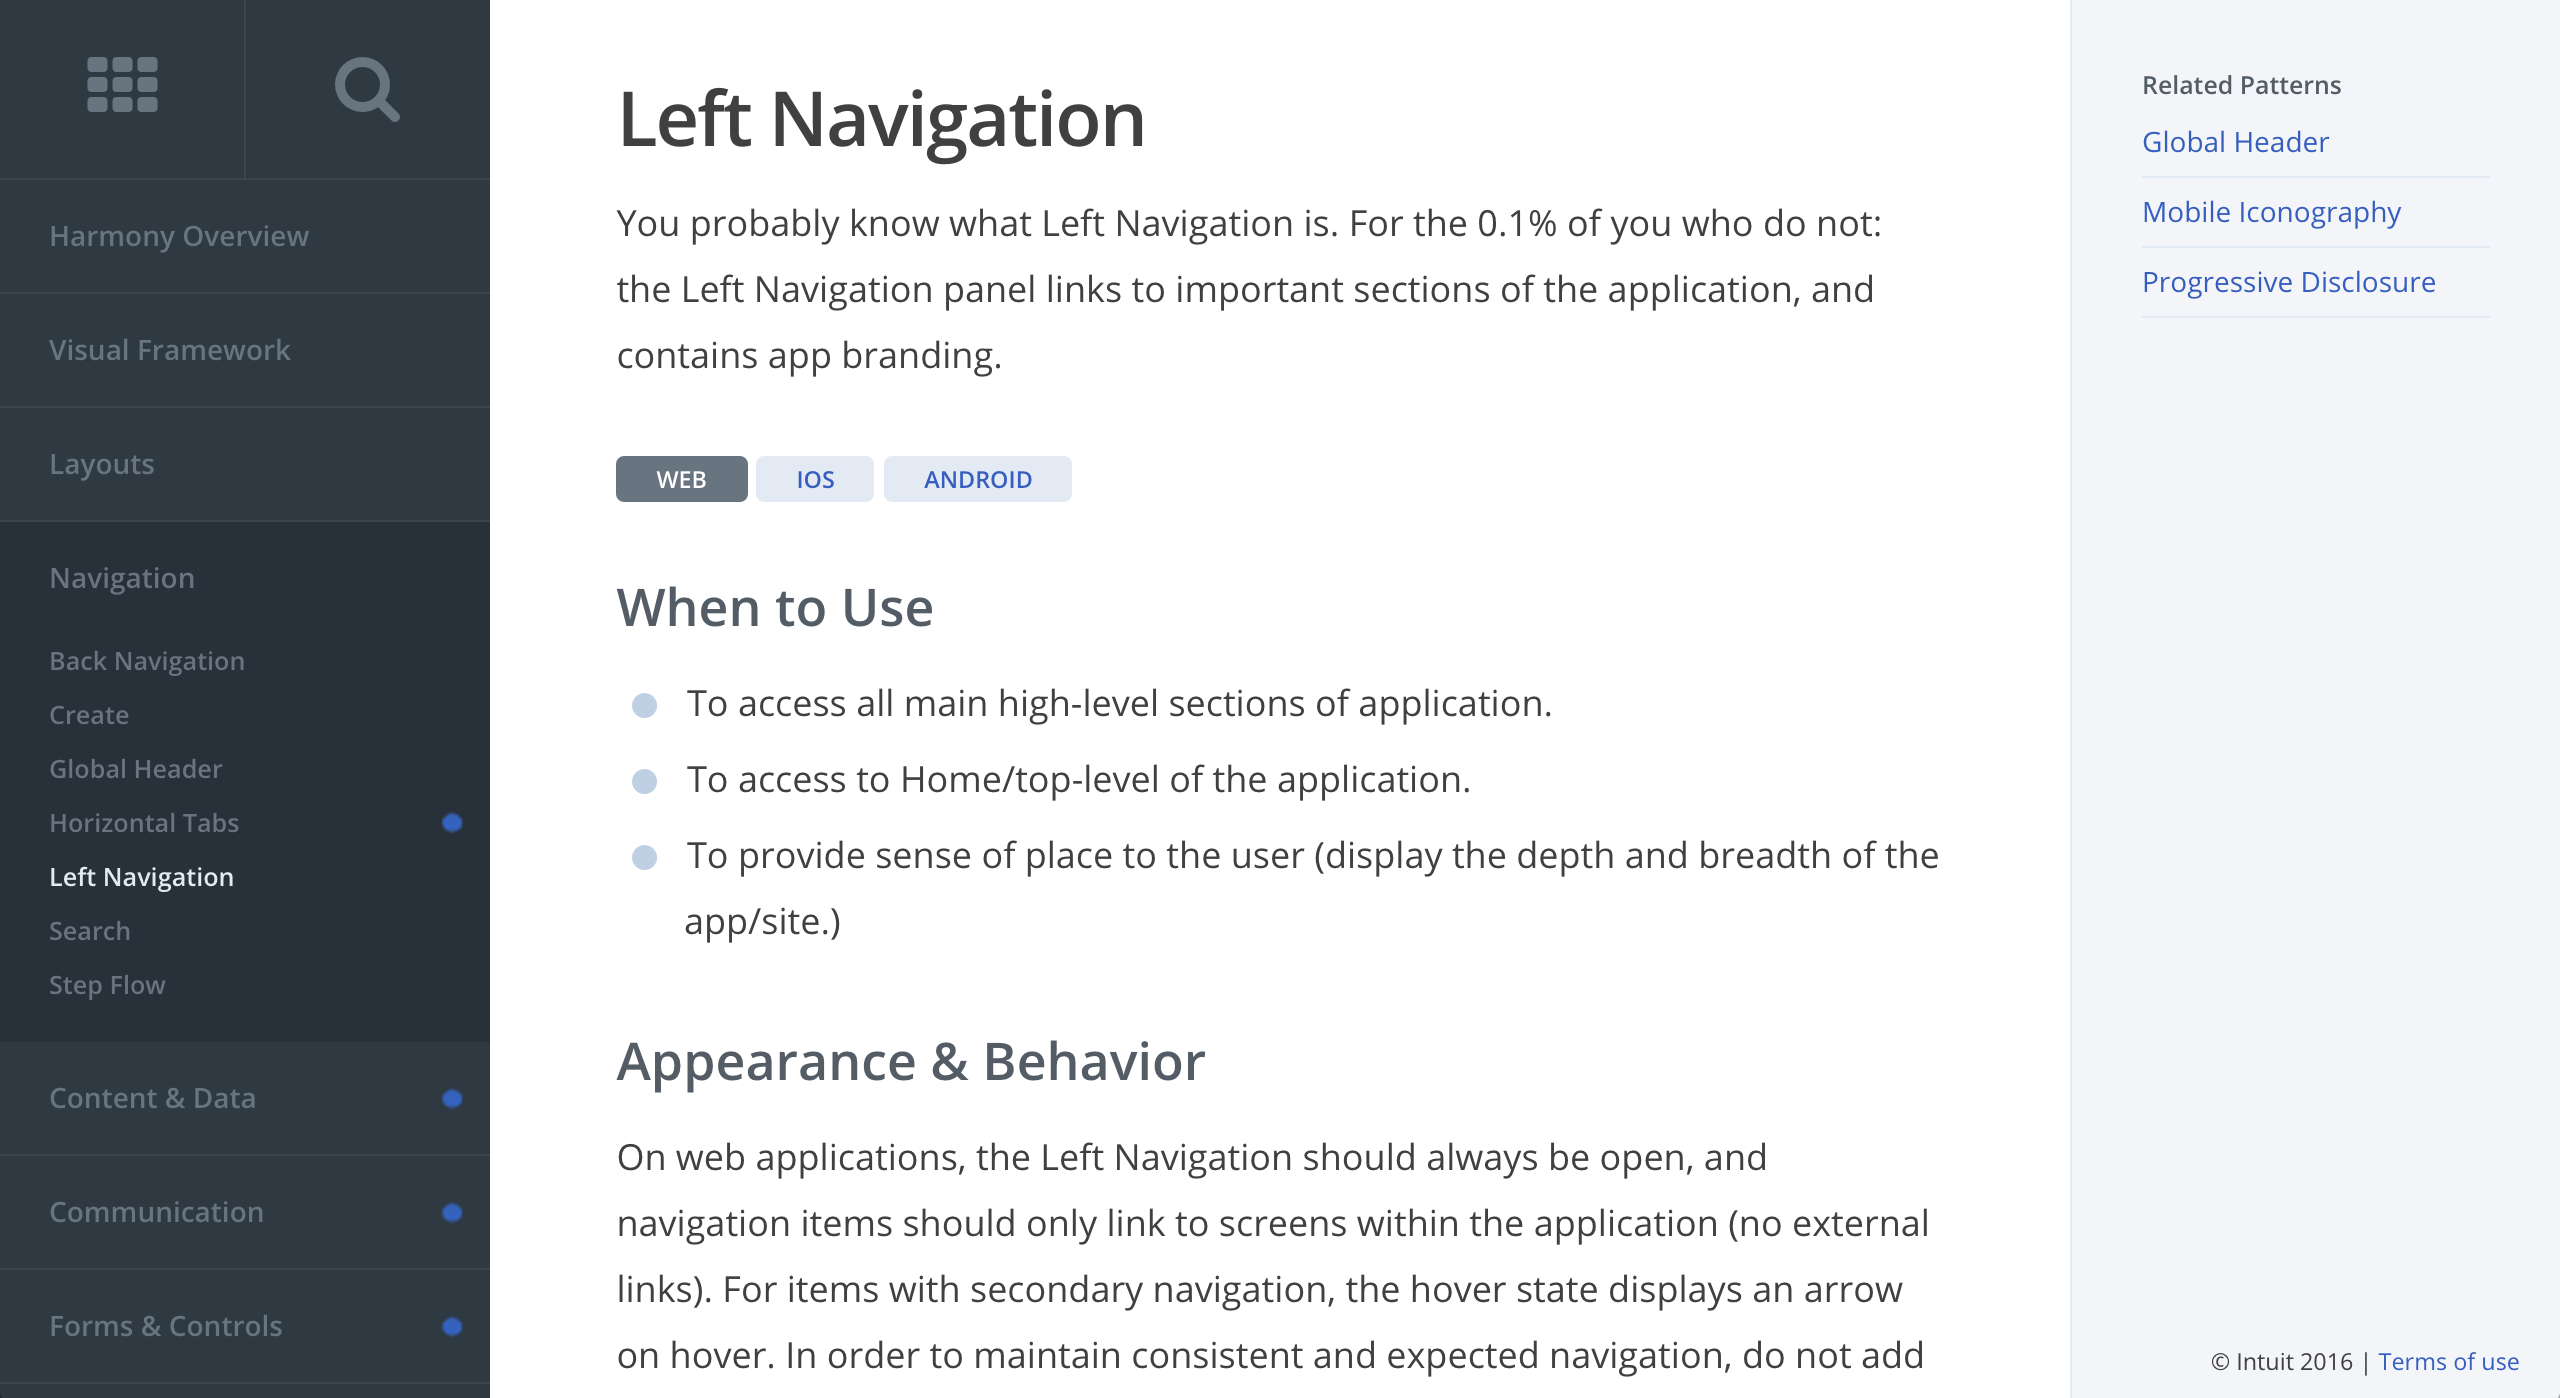 Intuit's Harmony pattern library includes buttons to switch between web, iOS, and Android for each pattern. This allows the team to maintain a mostly consistent design system across platforms but also document pattern divergences when they occur.